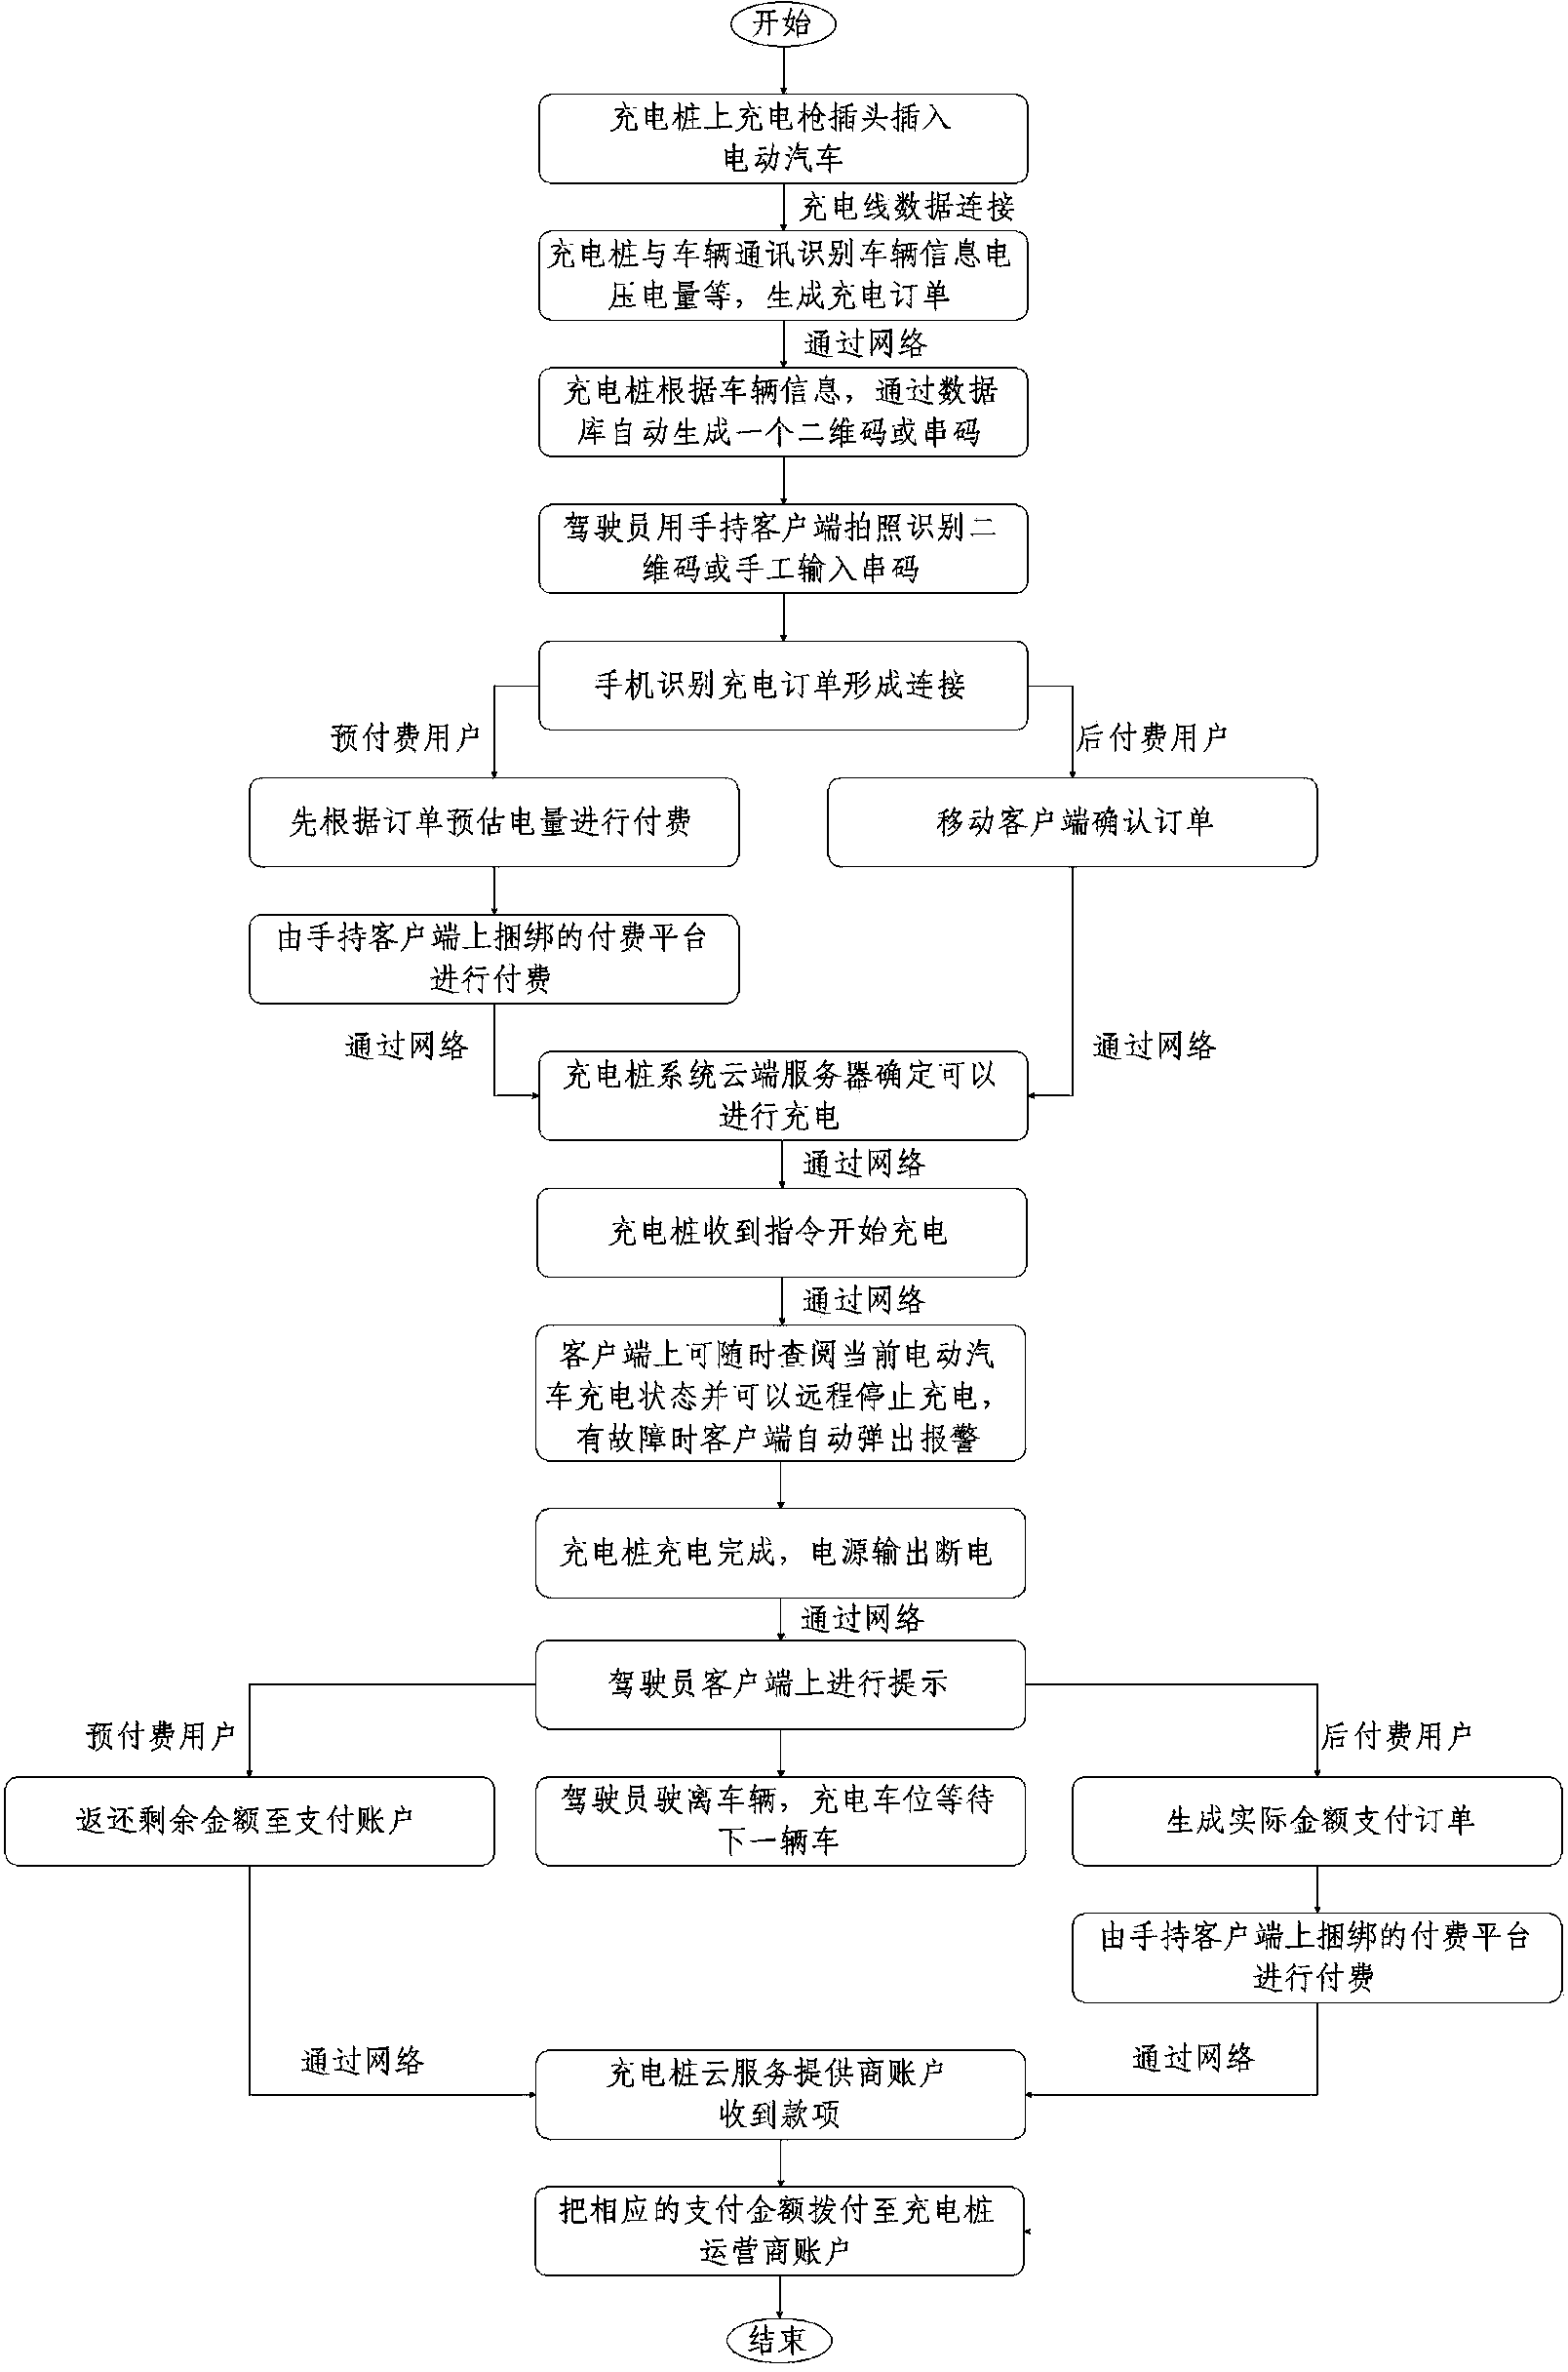 System for allowing handheld client side to network with charging pile to display payment